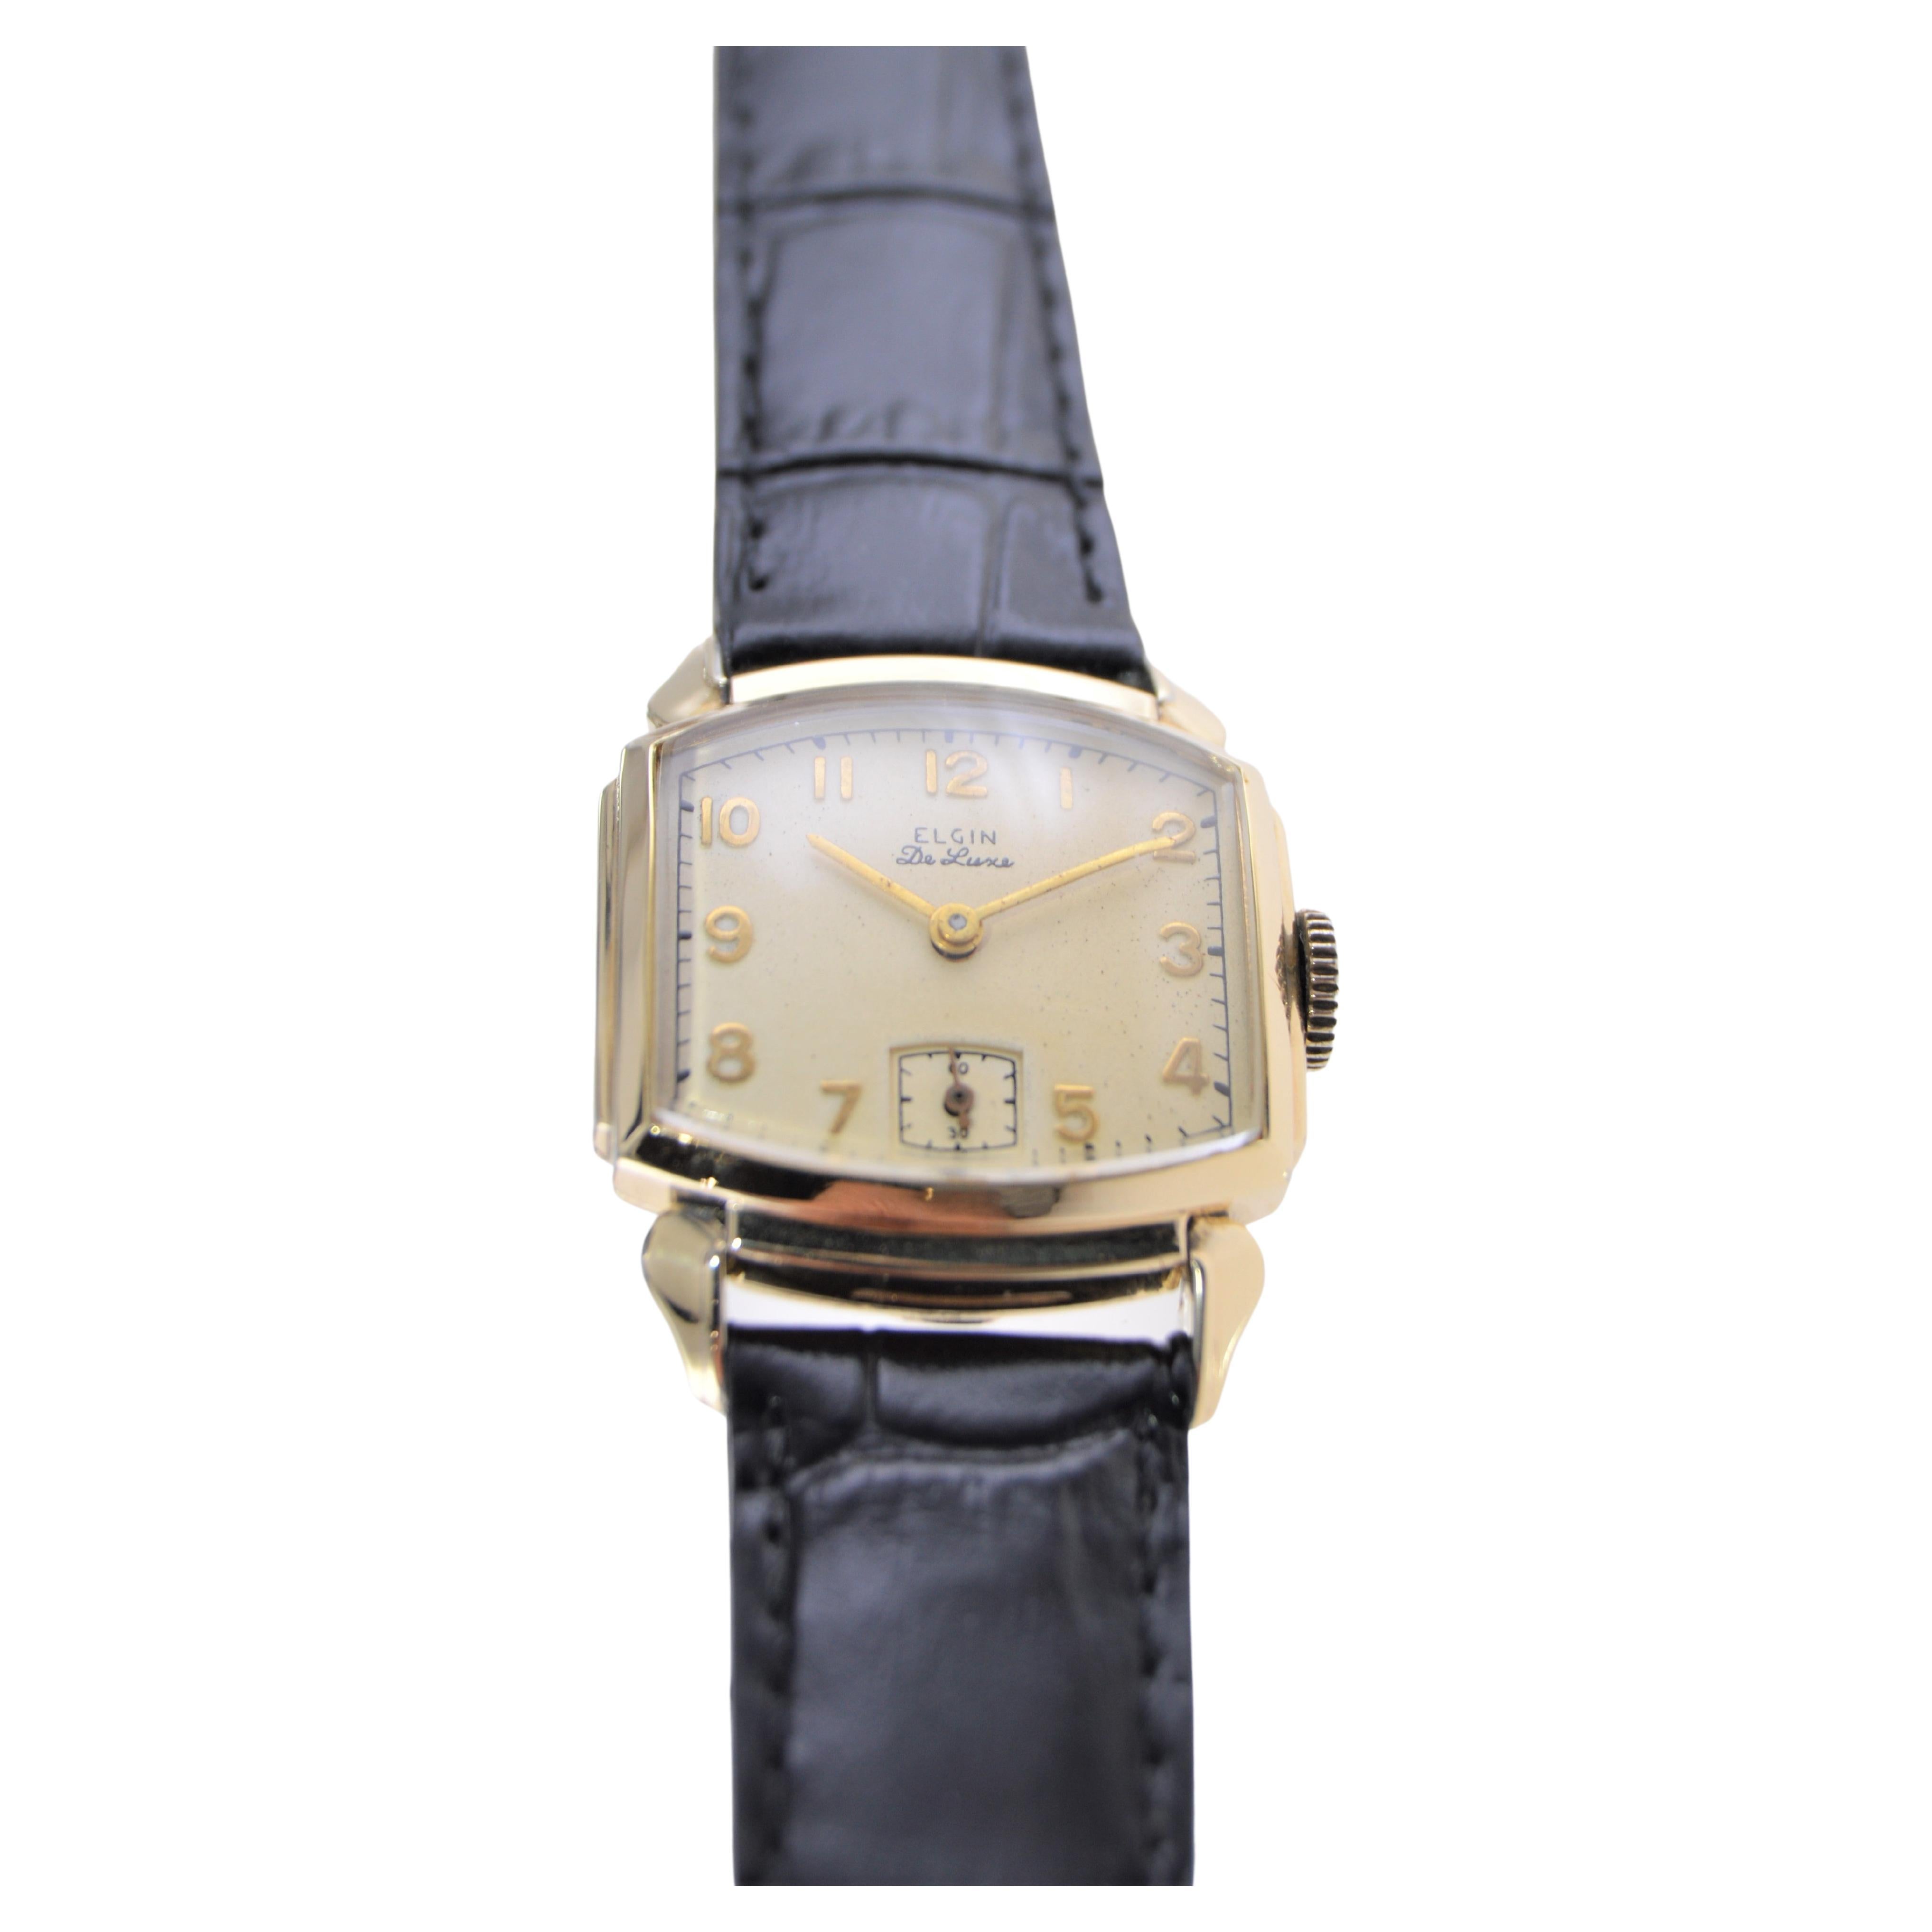 Elgin Gold Filled Art Deco Watch with Original Dial from 1940's For Sale 3